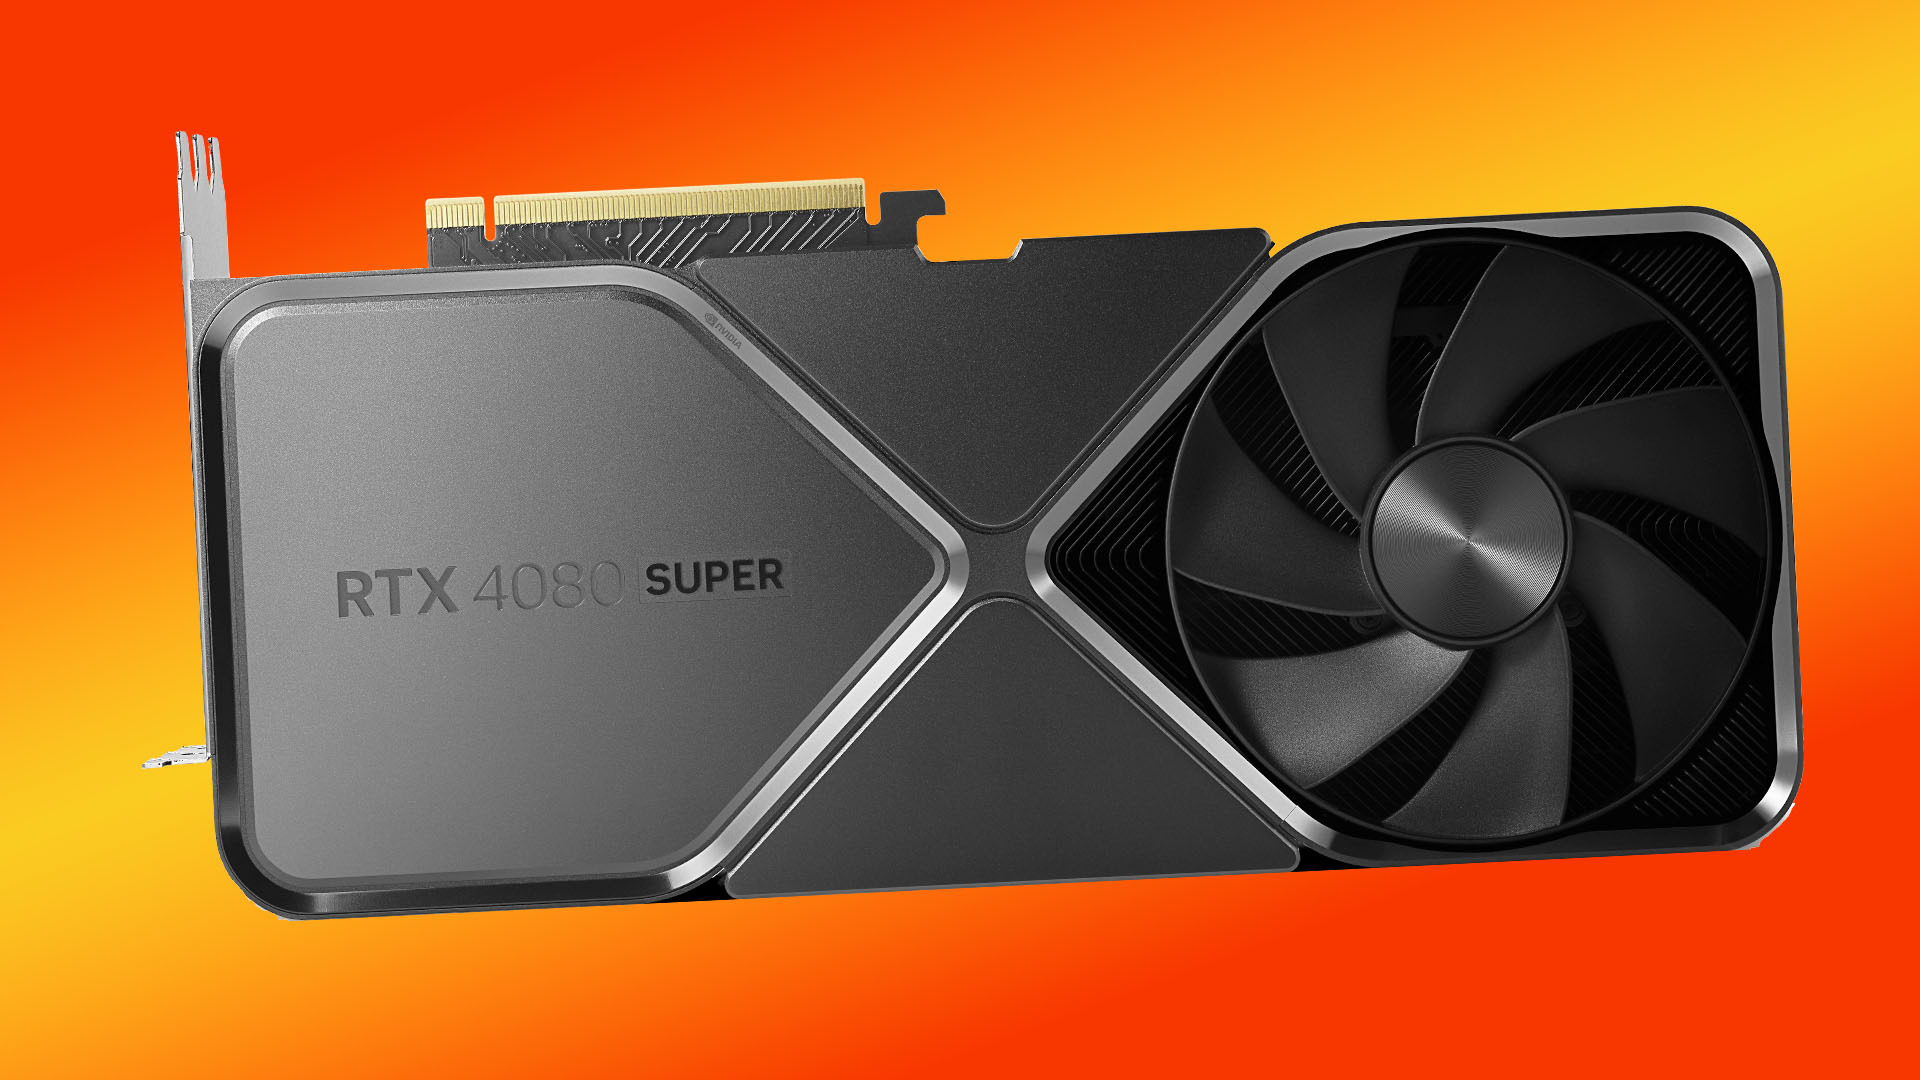 Nvidia RTX 4080 Super release date, price, specs, and benchmarks